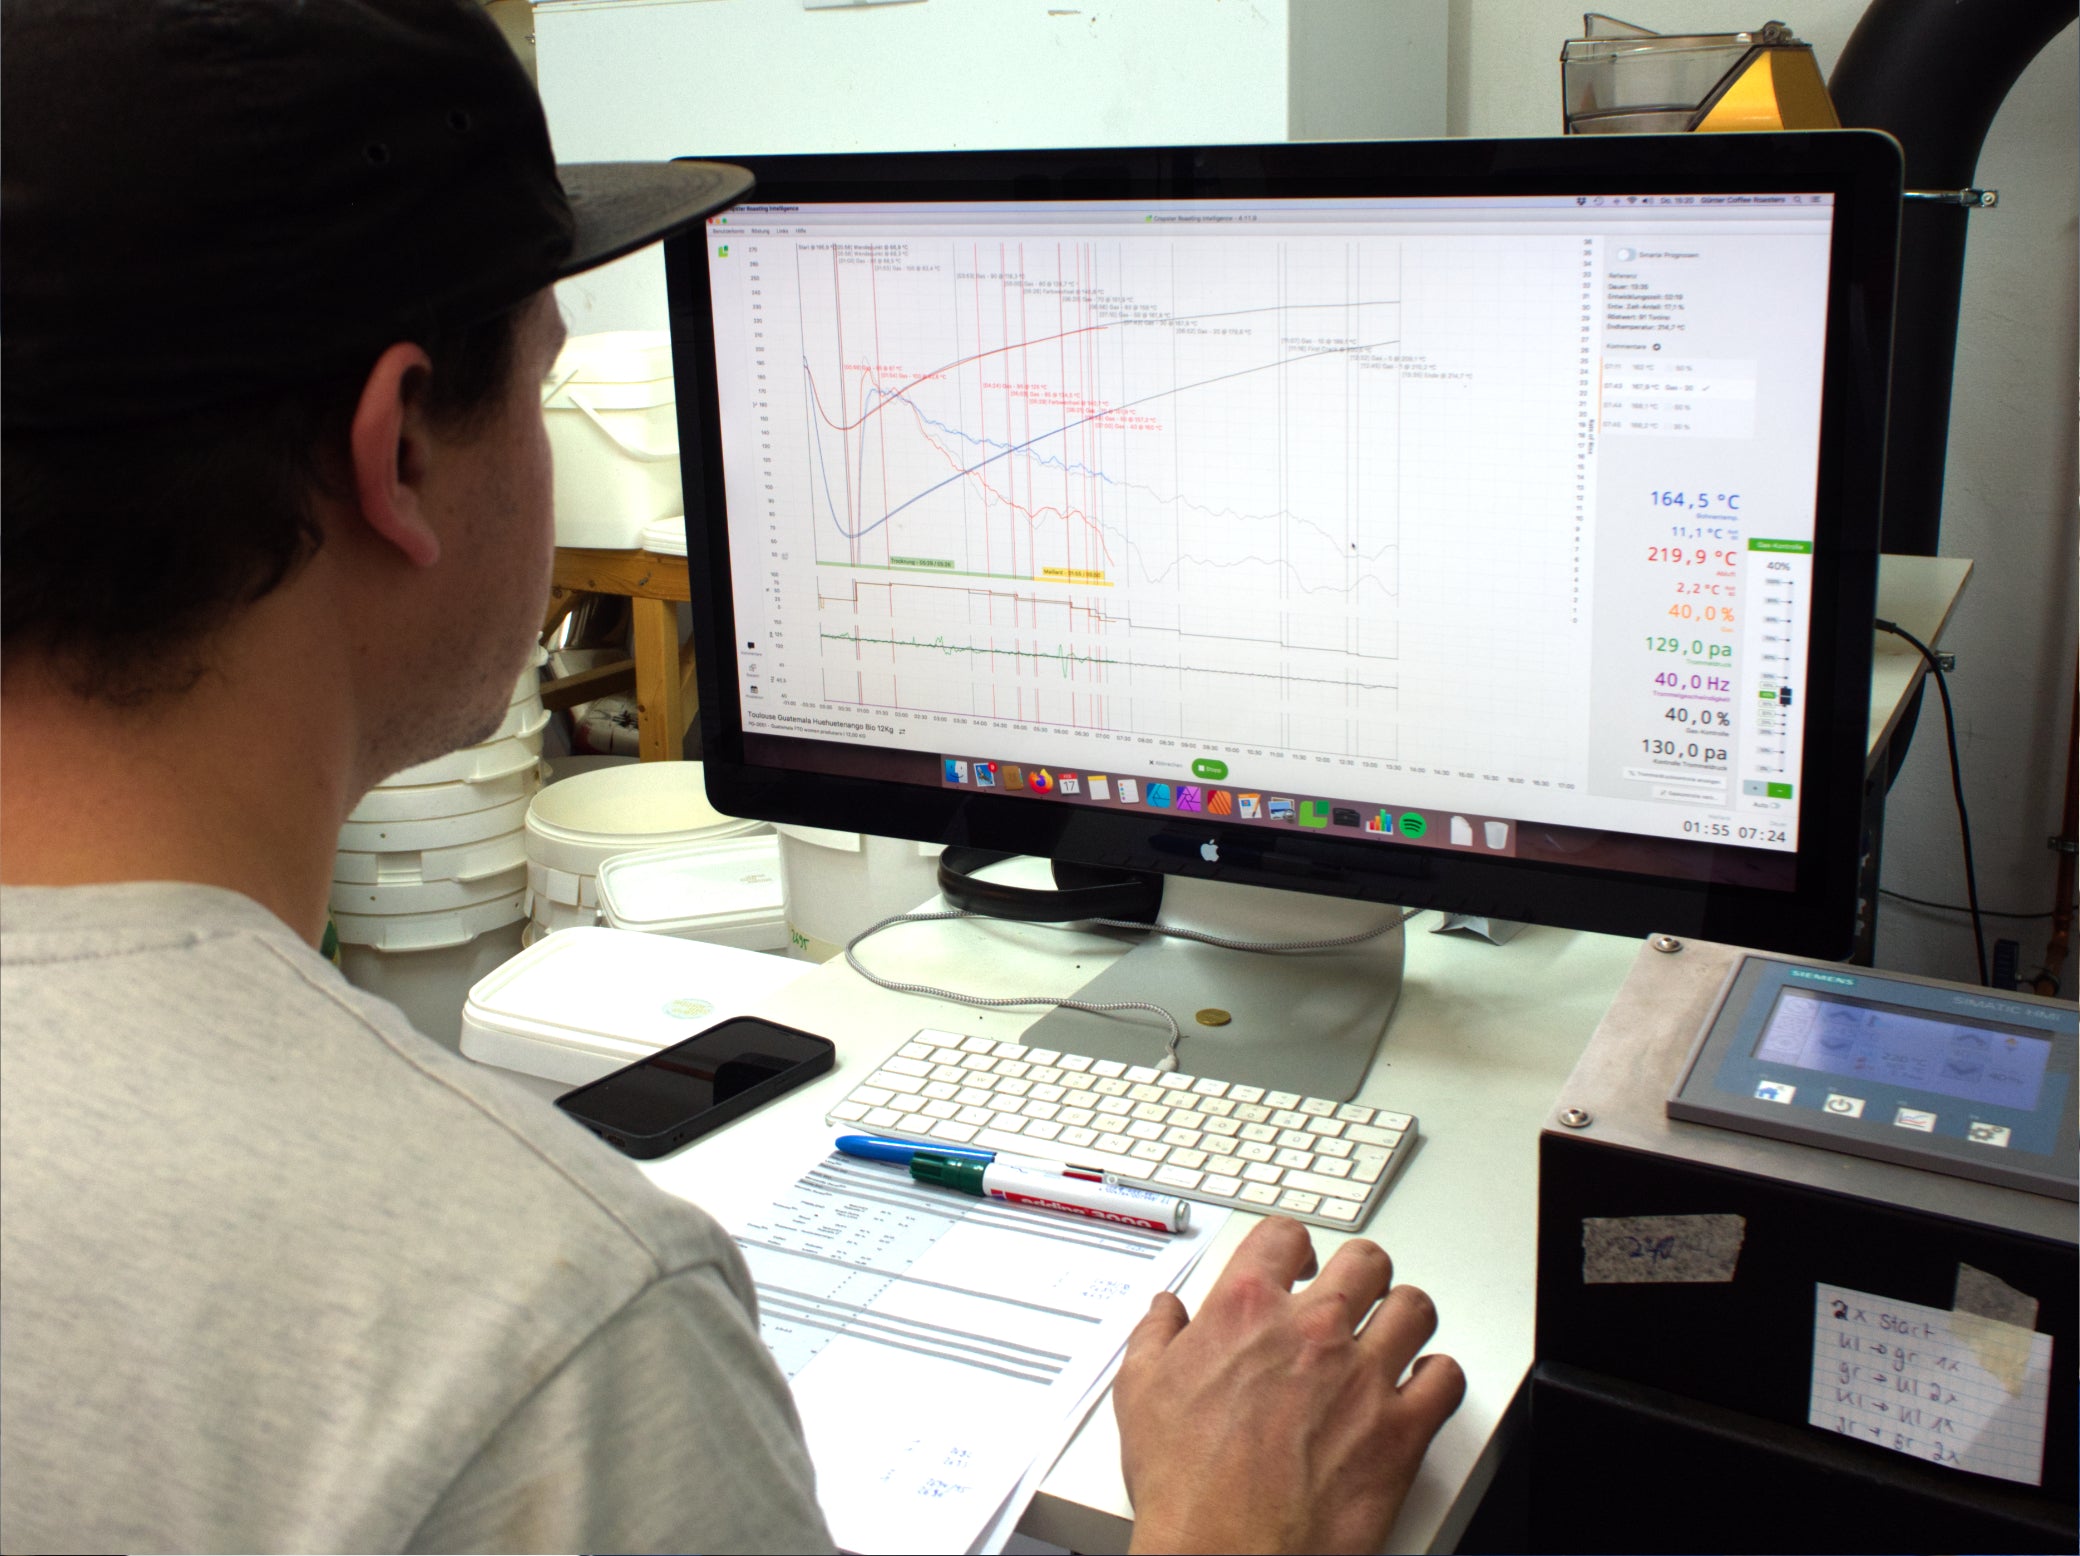 Philip monitors the development of a roasting curve live using the Cropster roasting software.